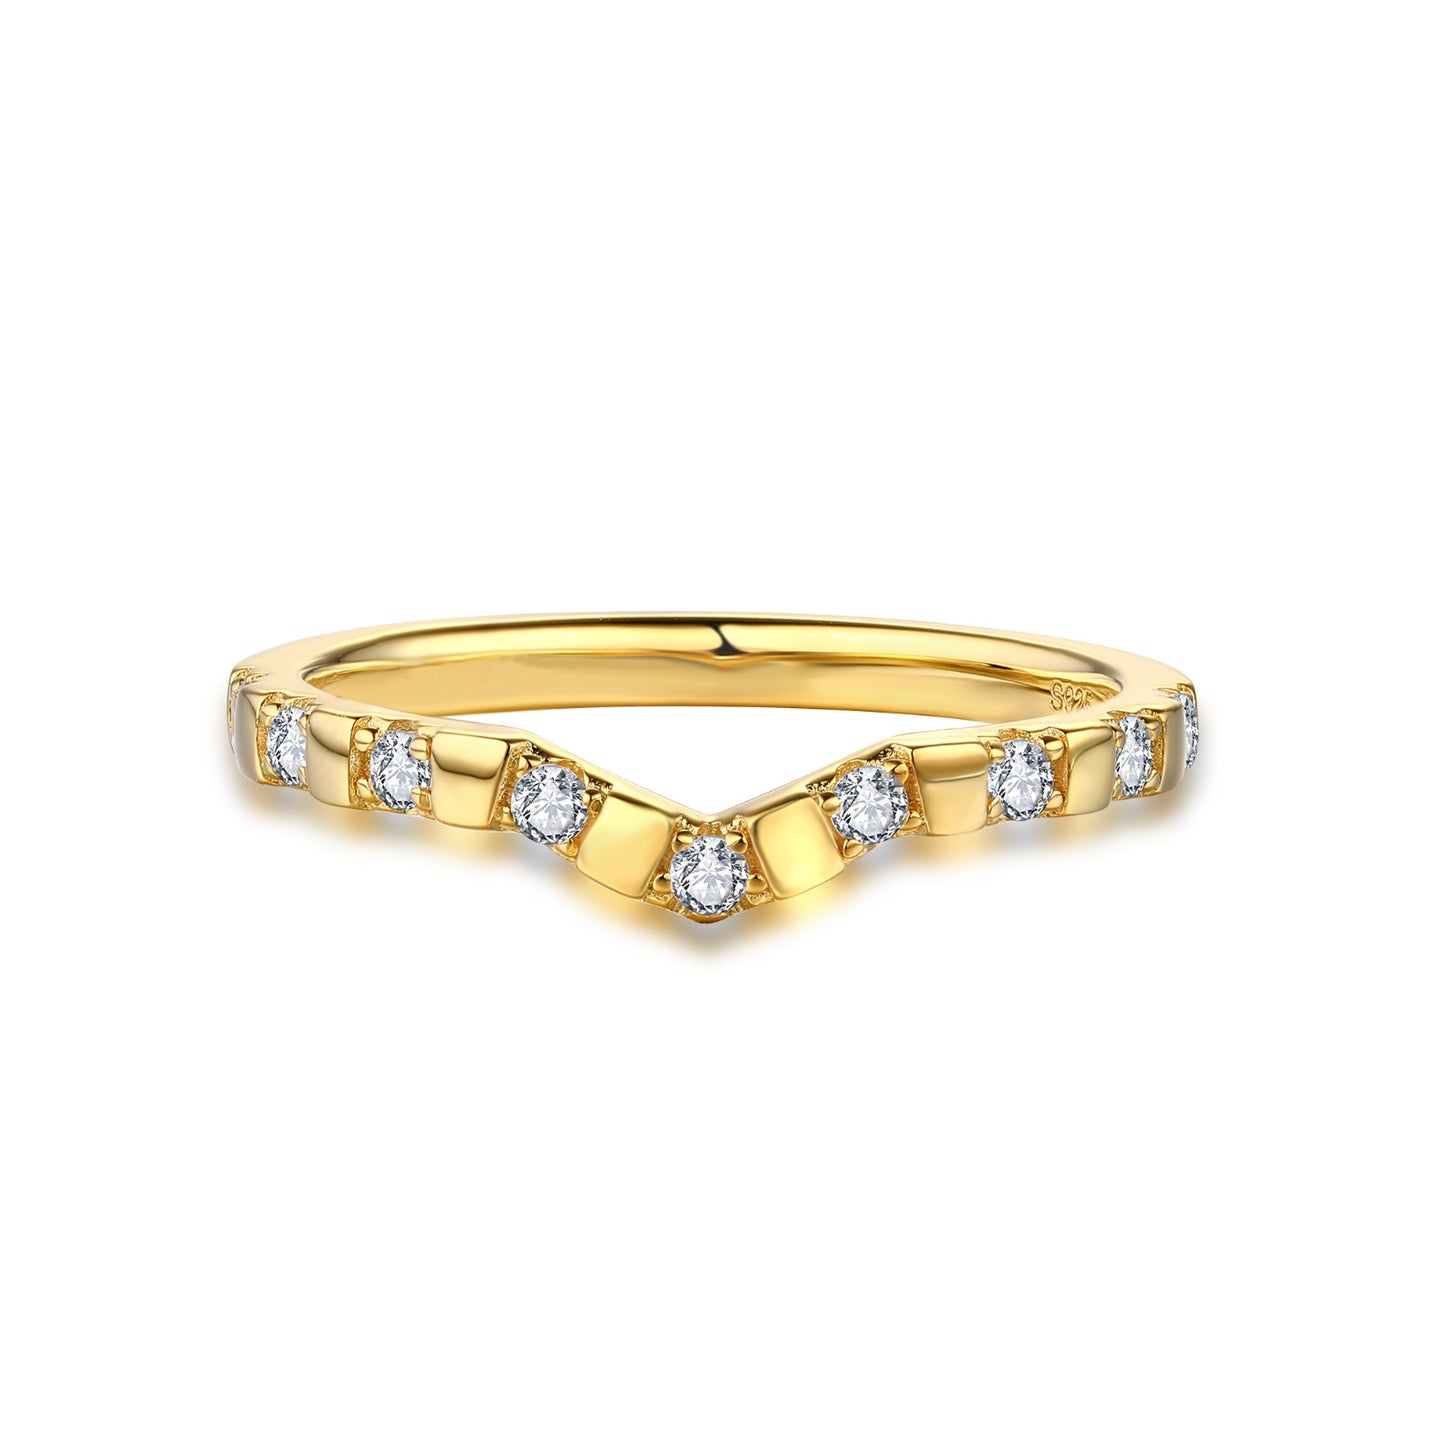 The Promise Ring Co. Connecting couples rings. A wishbone shape ring with unique diamond simulant band. In 18ct Gold